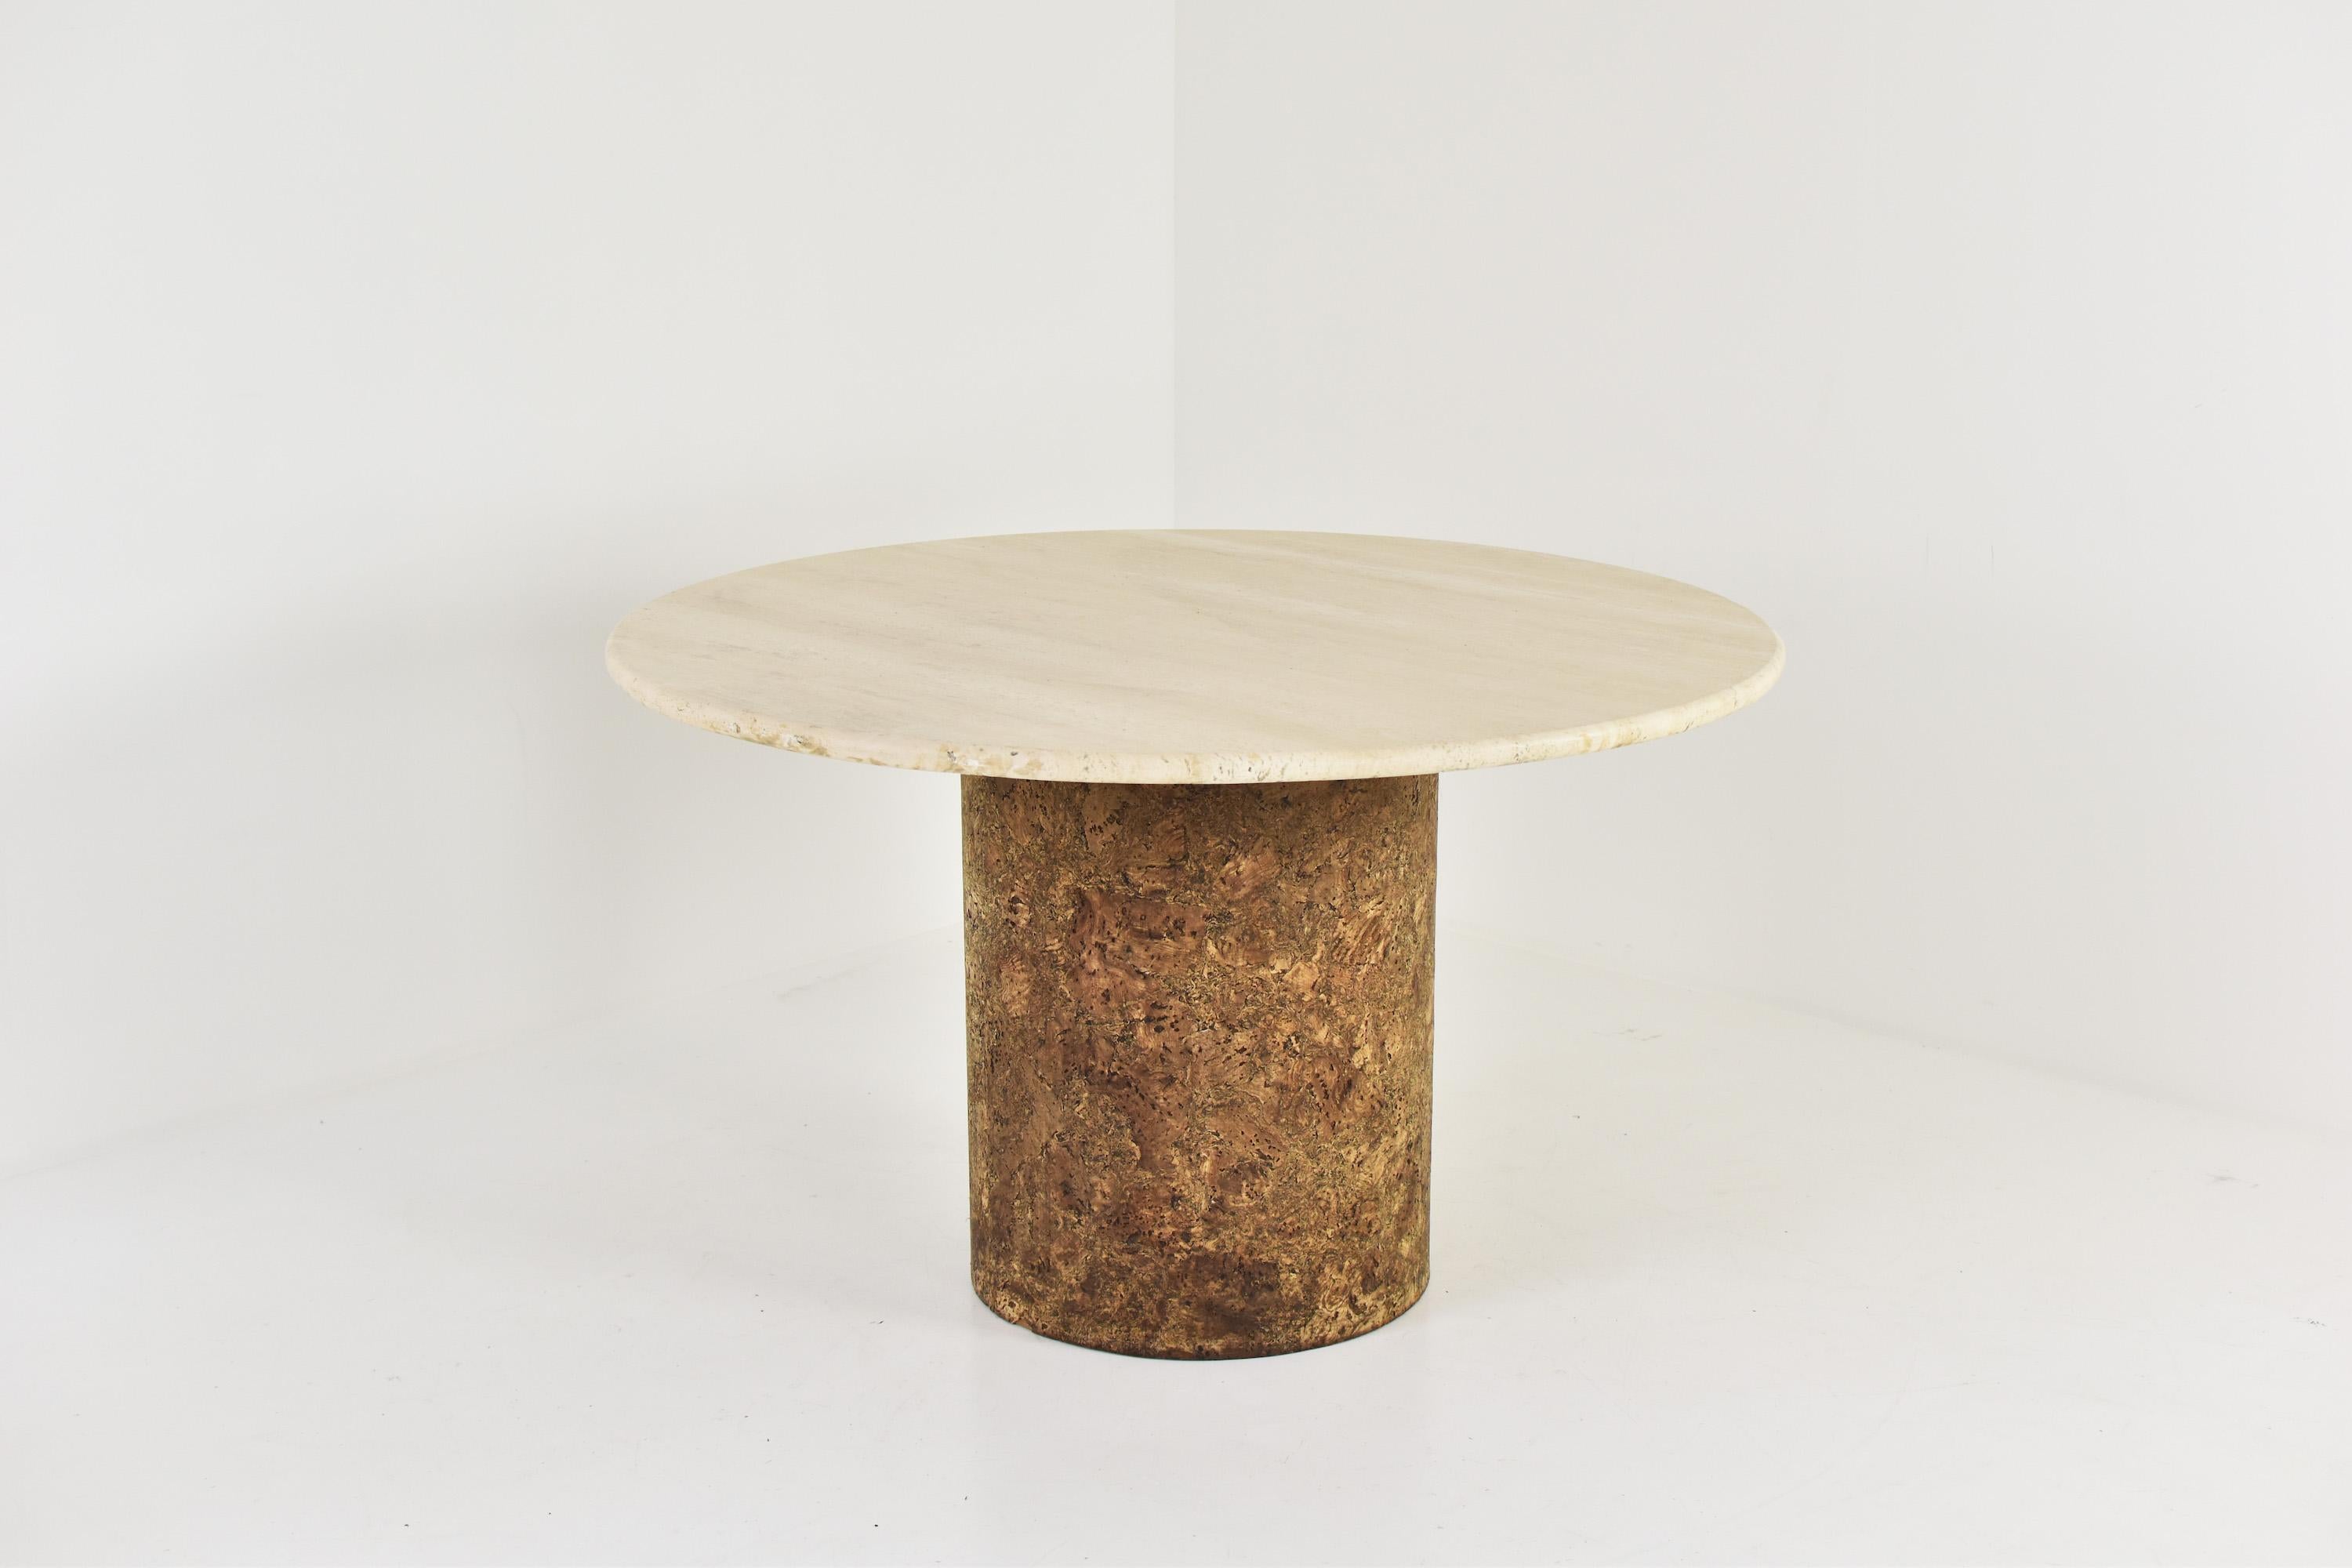 Mid-Century Modern Dining Table in Travertine and Cork from the 1960’s